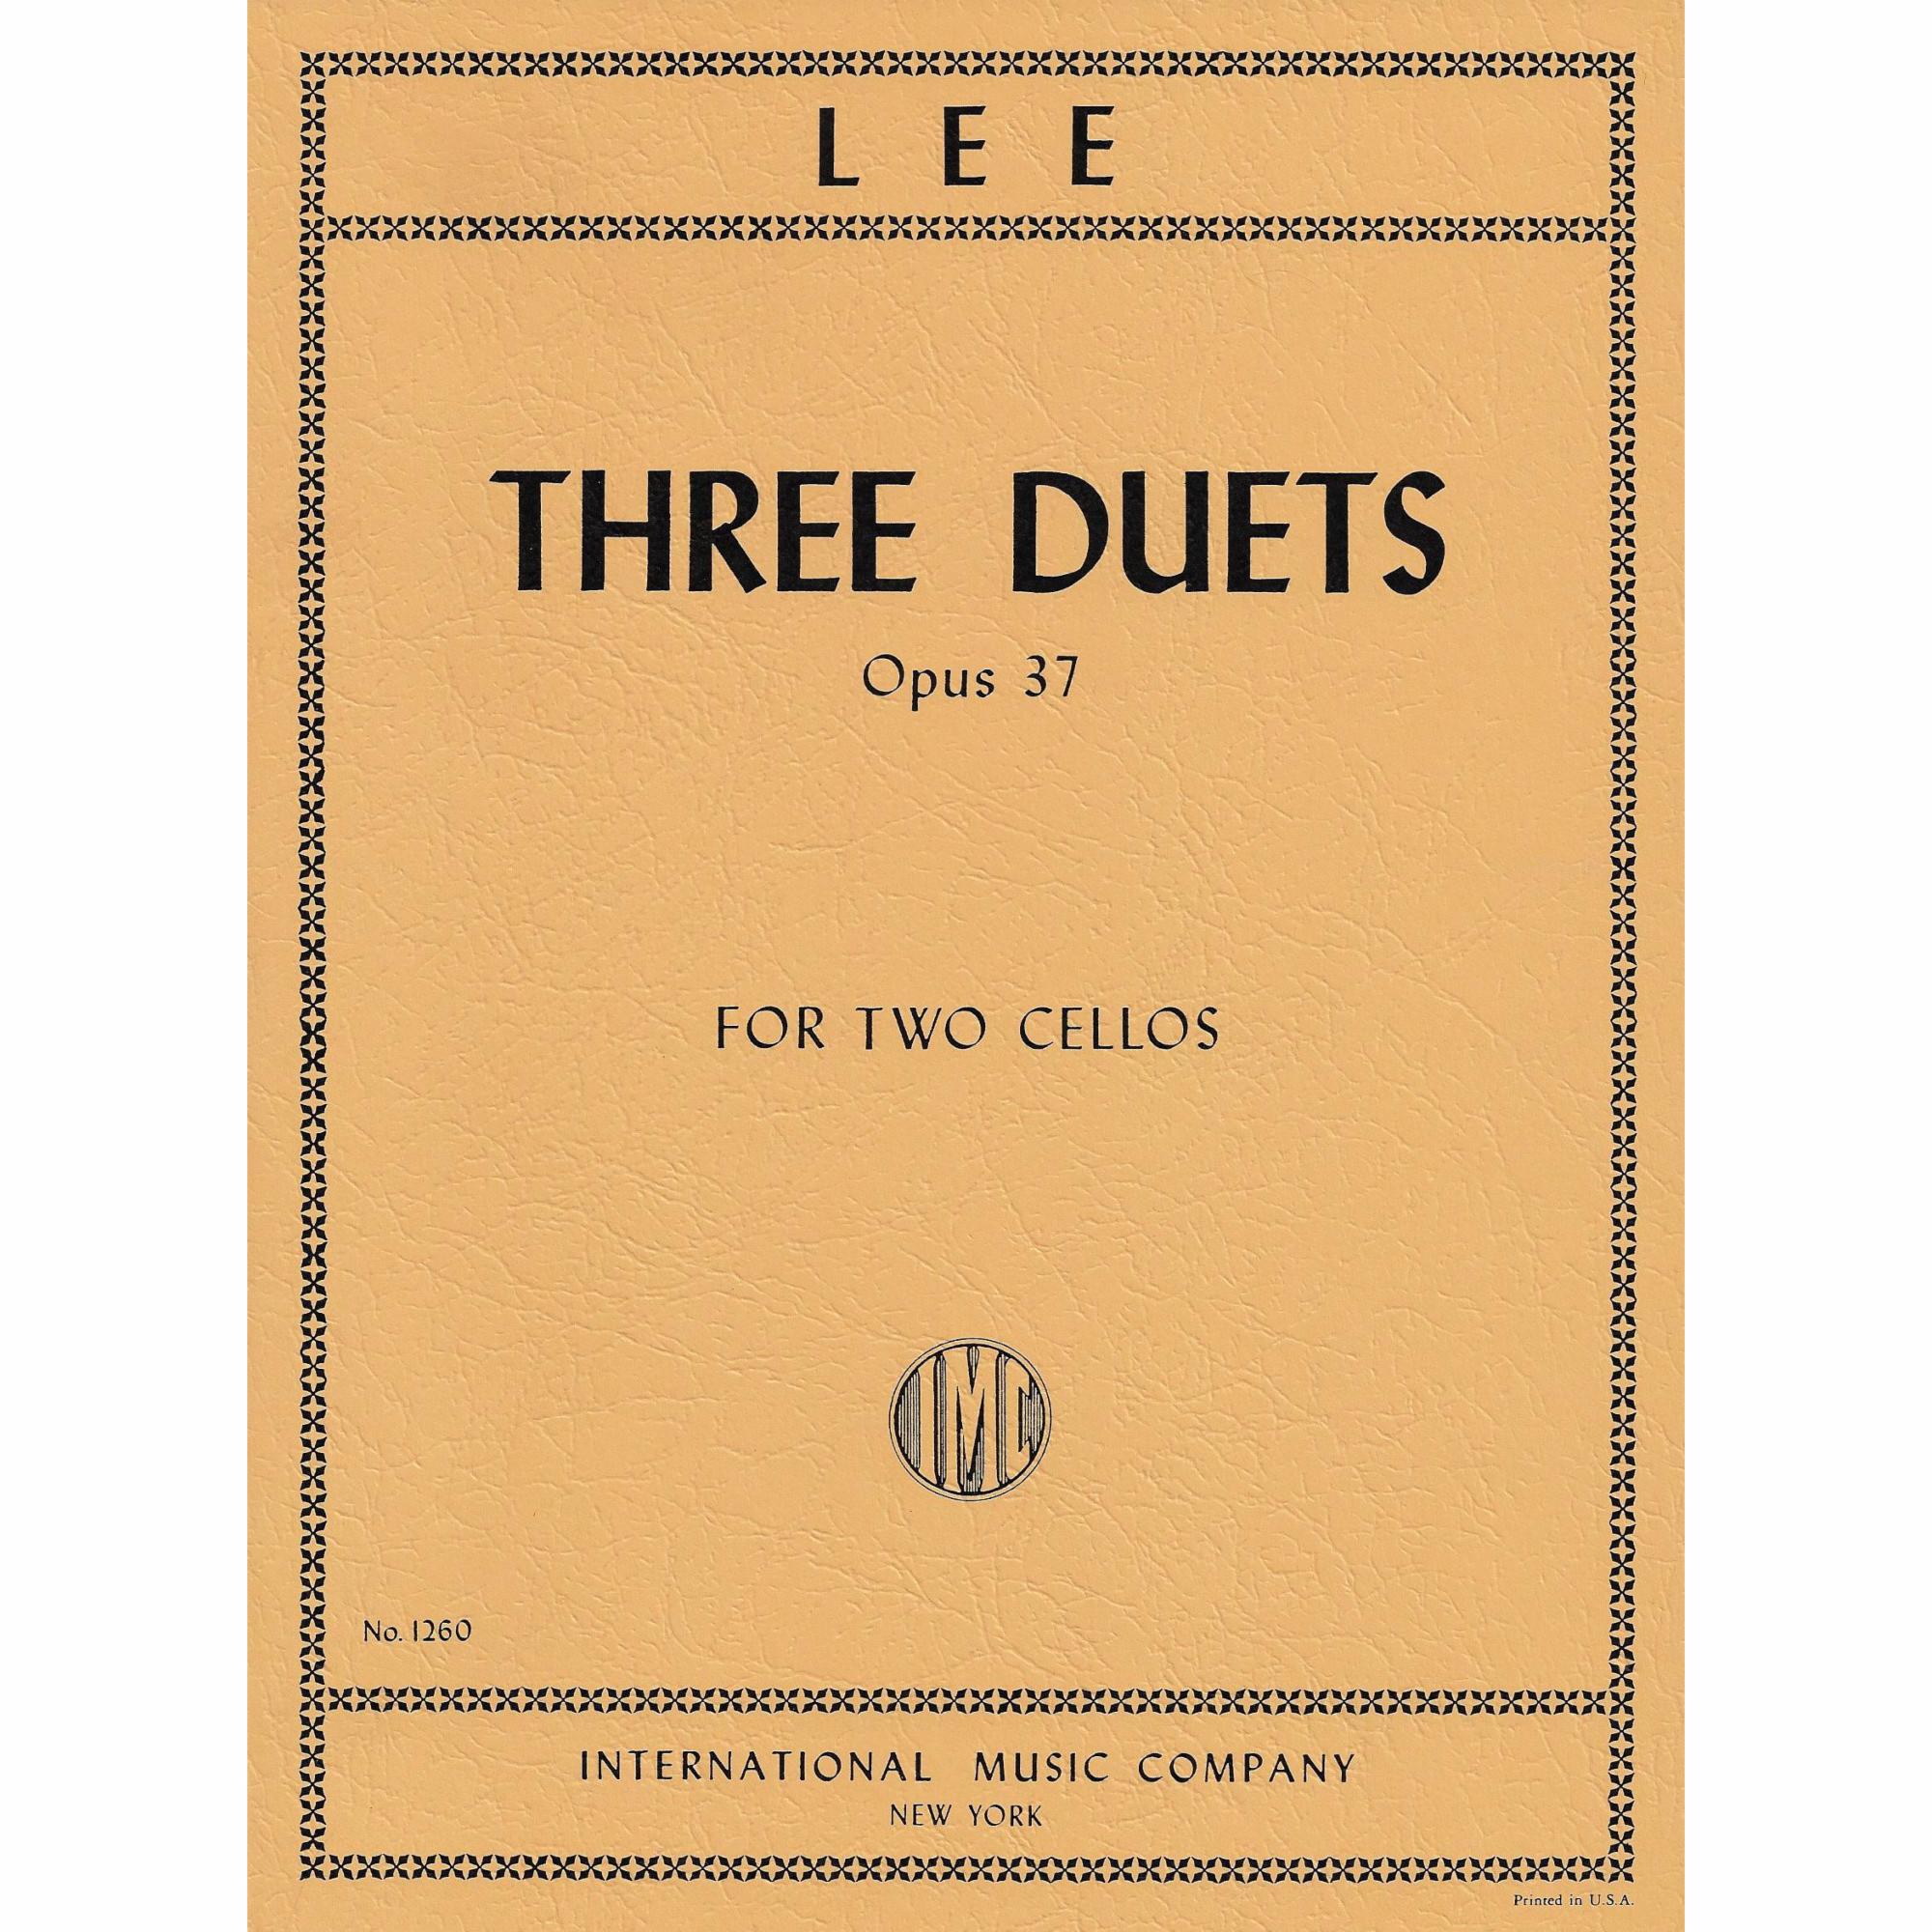 Lee -- Three Duets, Op. 37 for Two Cellos